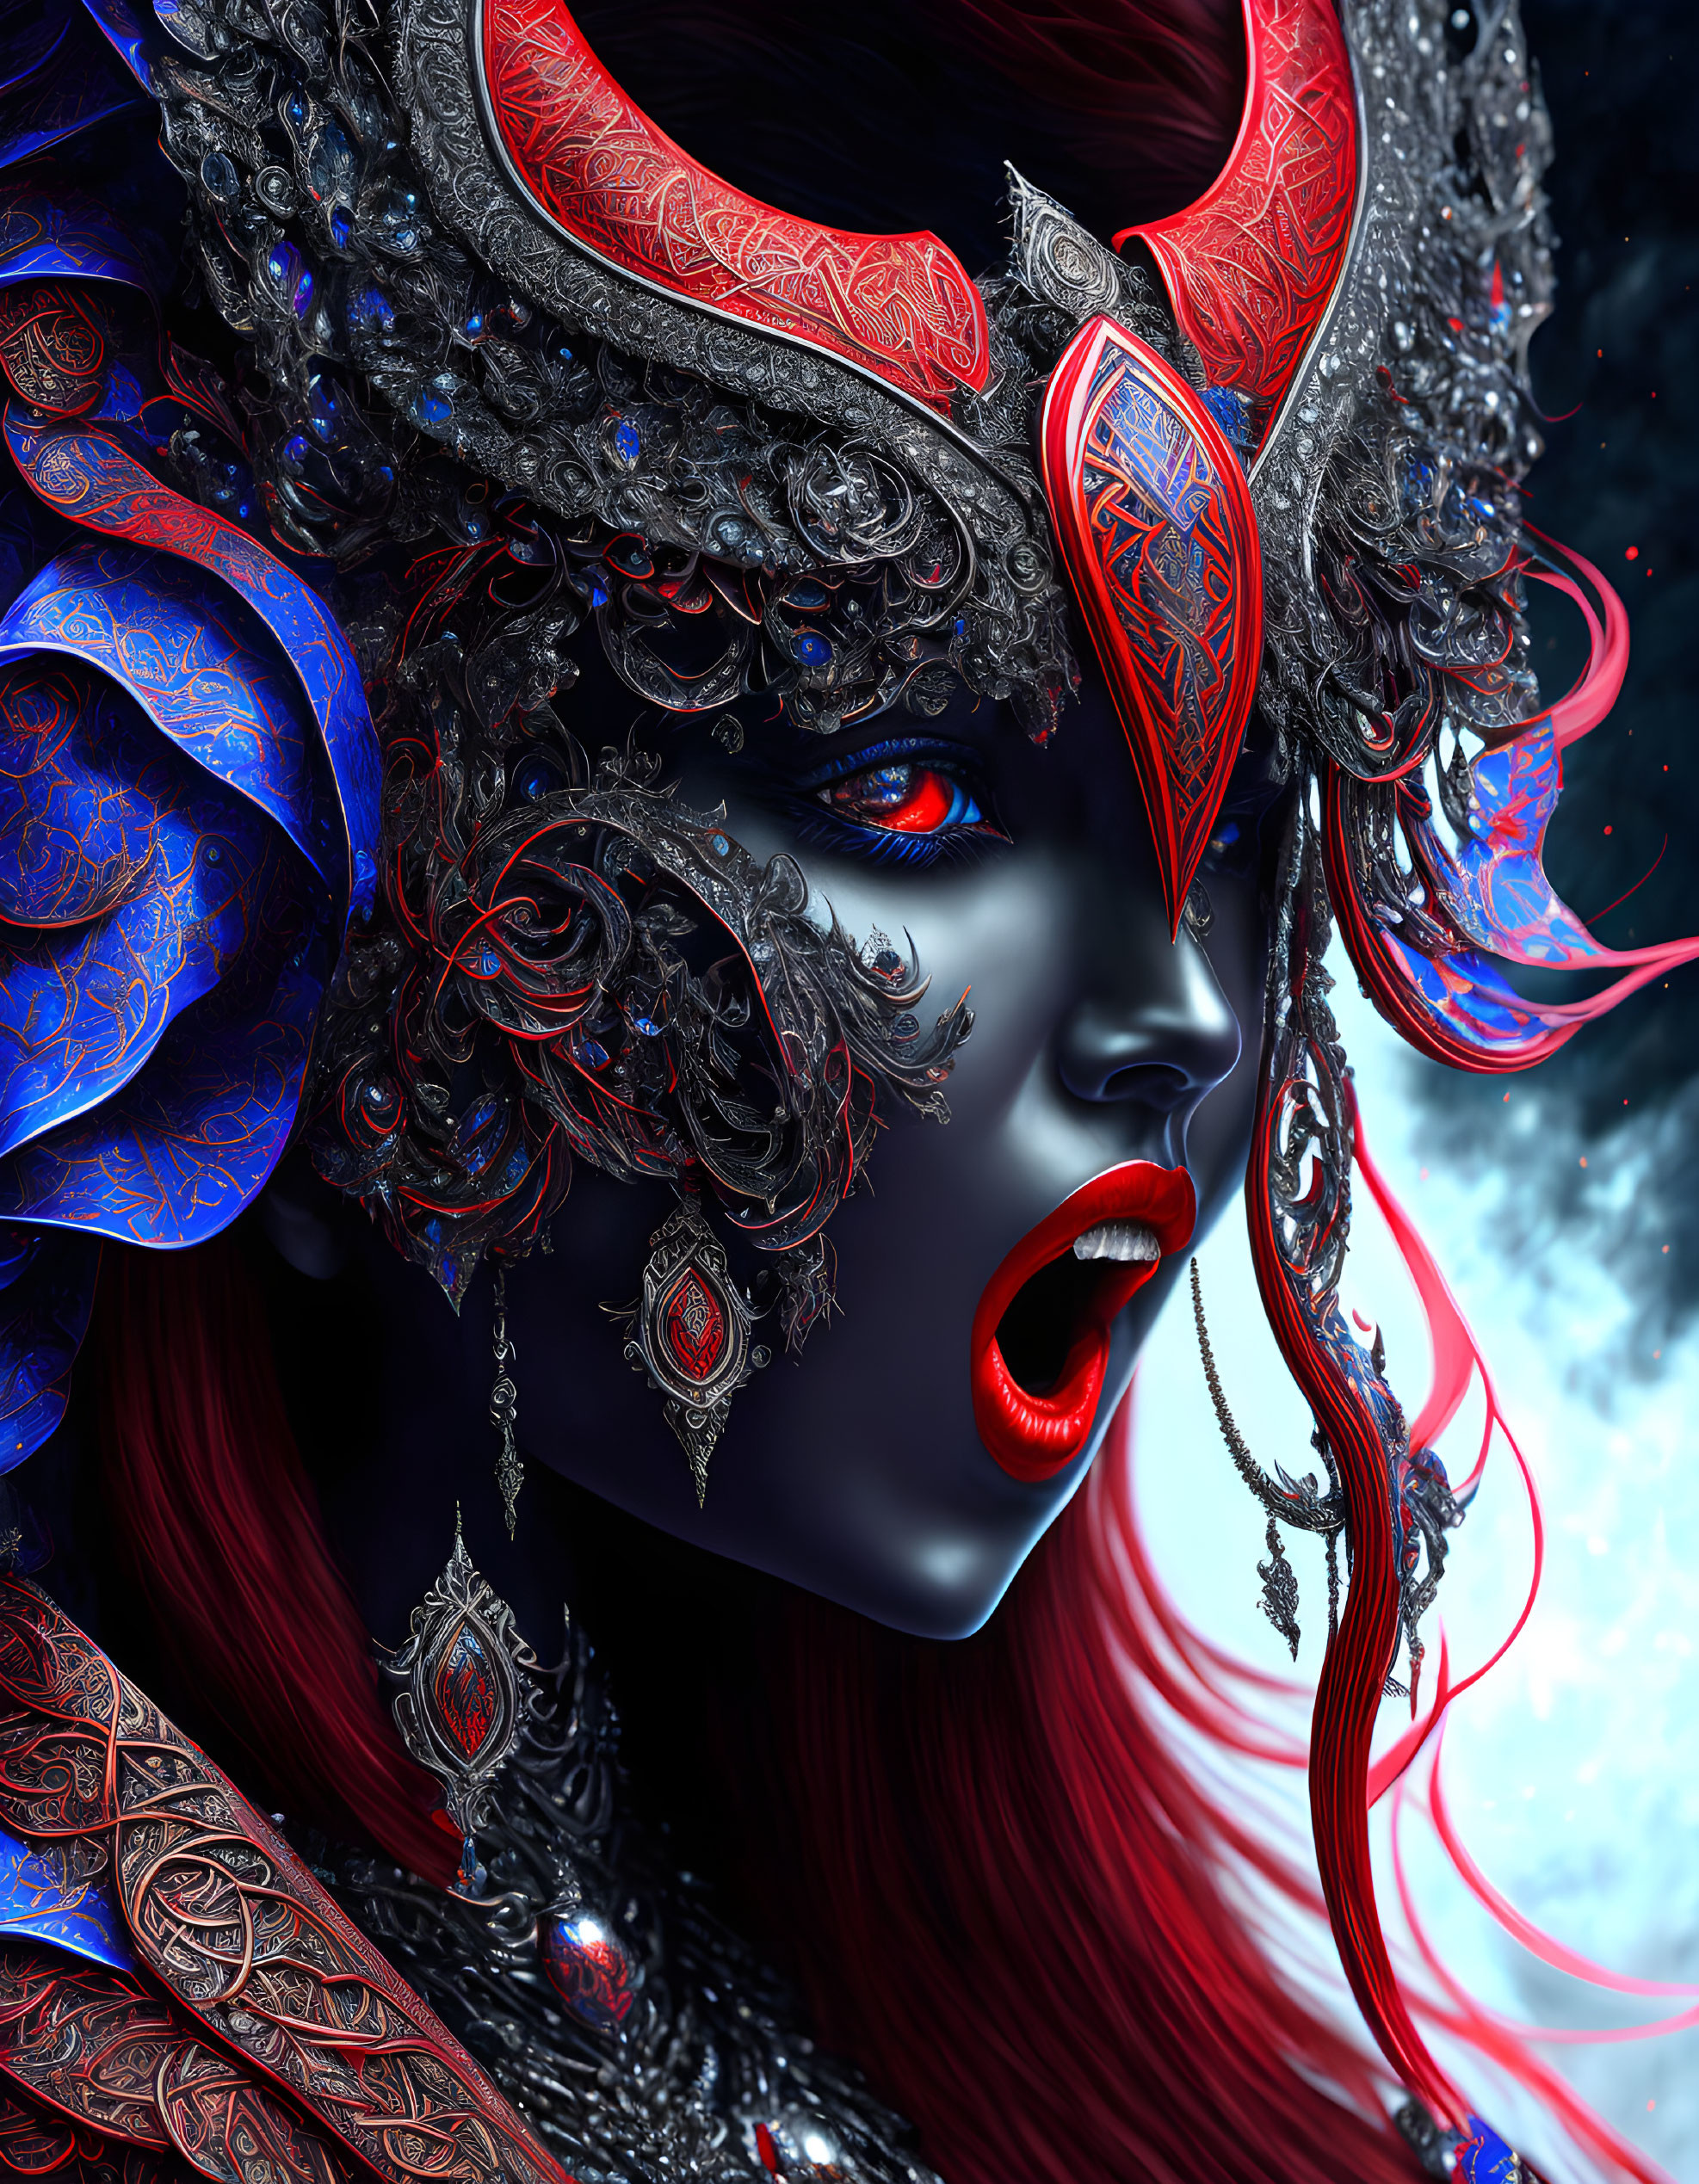 Fantastical female figure with red eyes and ornate horned headdress in starry setting